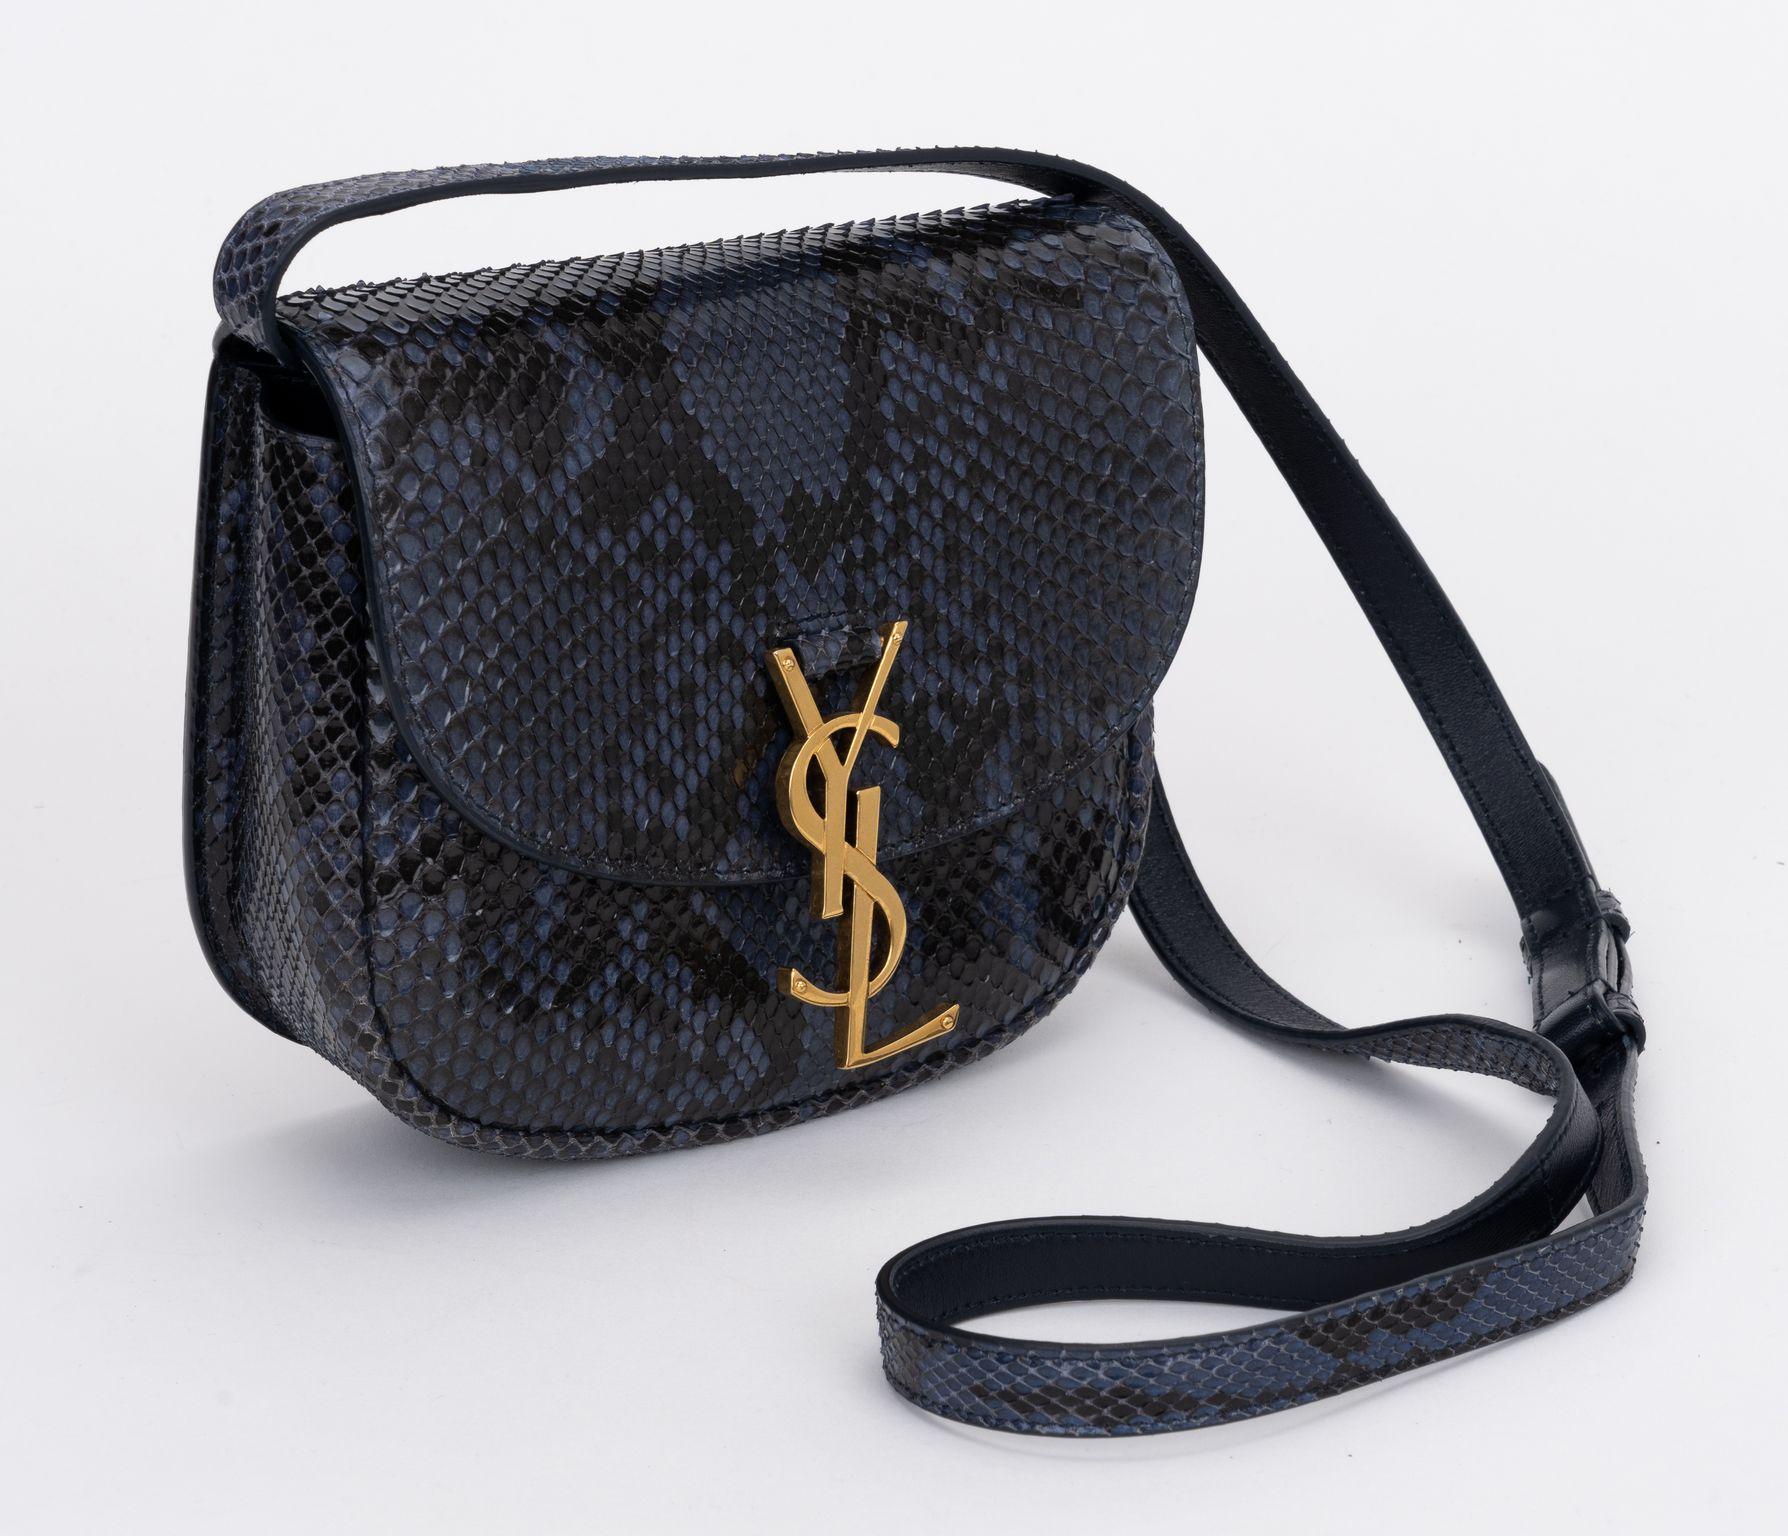 YSL brand new blue black python cross body bag, removable strap makes it wearable also as a clutch. Lined in black leather, gold tone hardware. Comes with original dust cover.